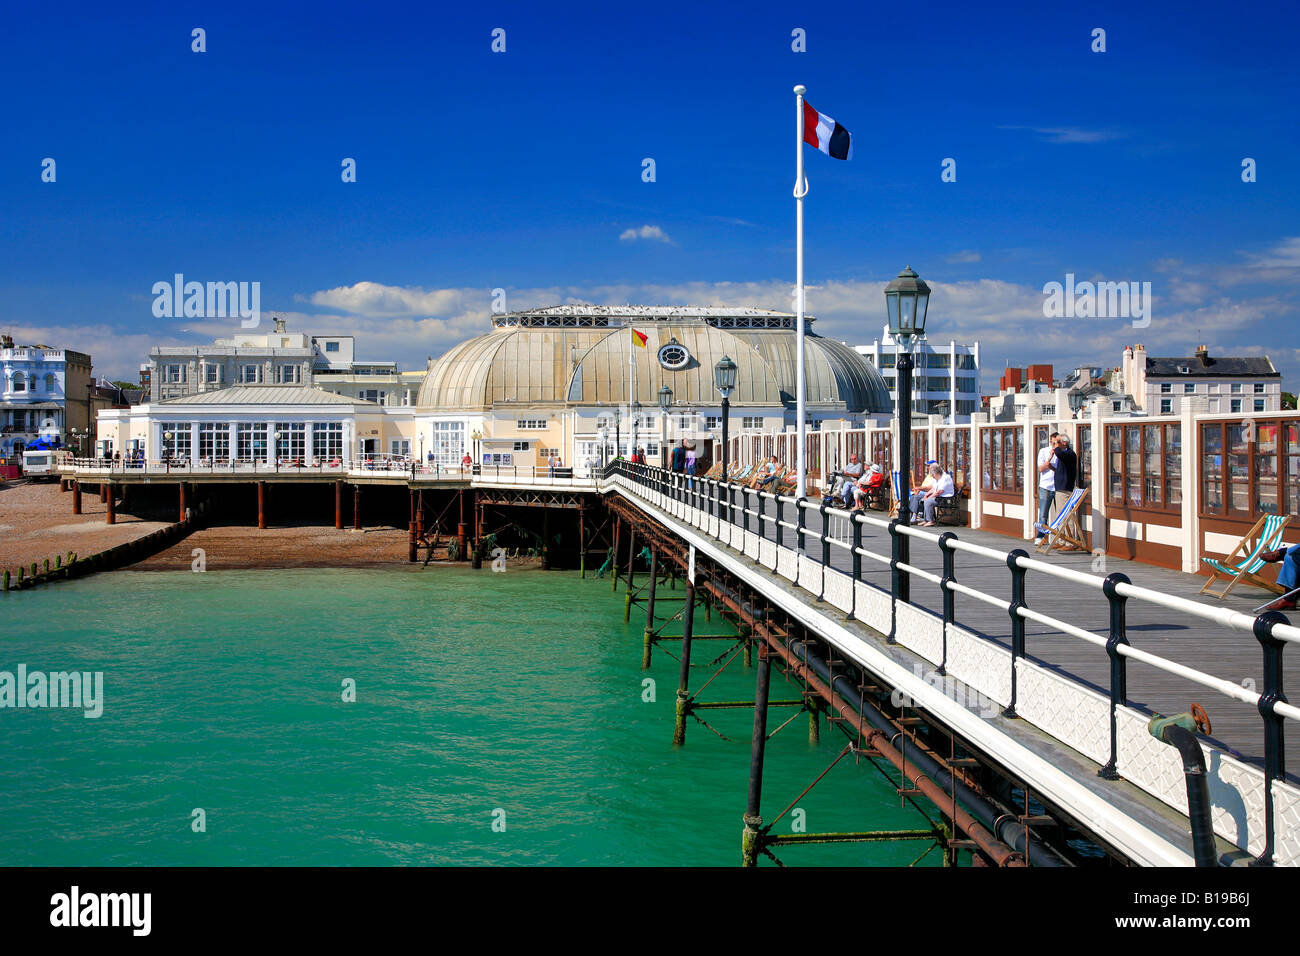 The Pavilion Theatre on the Victorian Pier Worthing Promenade West Sussex England Britain UK Stock Photo